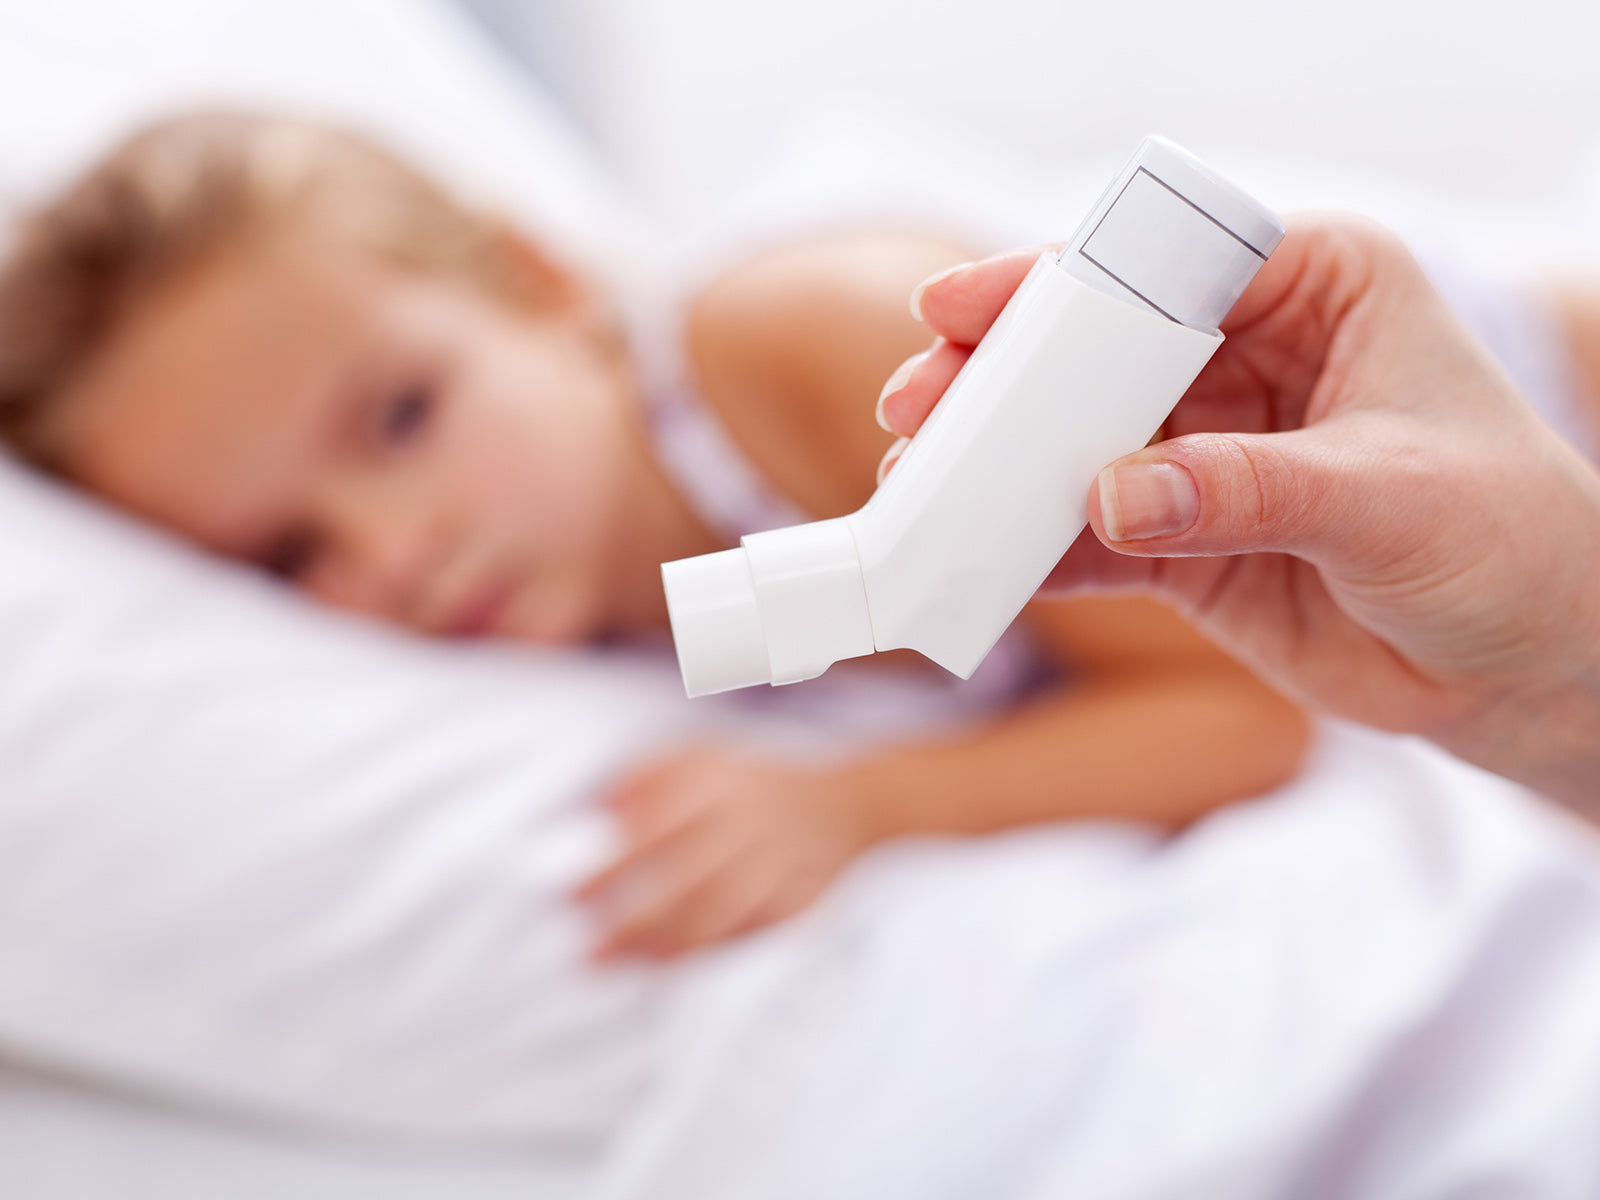 A parent hold an asthma inhaler over a child in bed